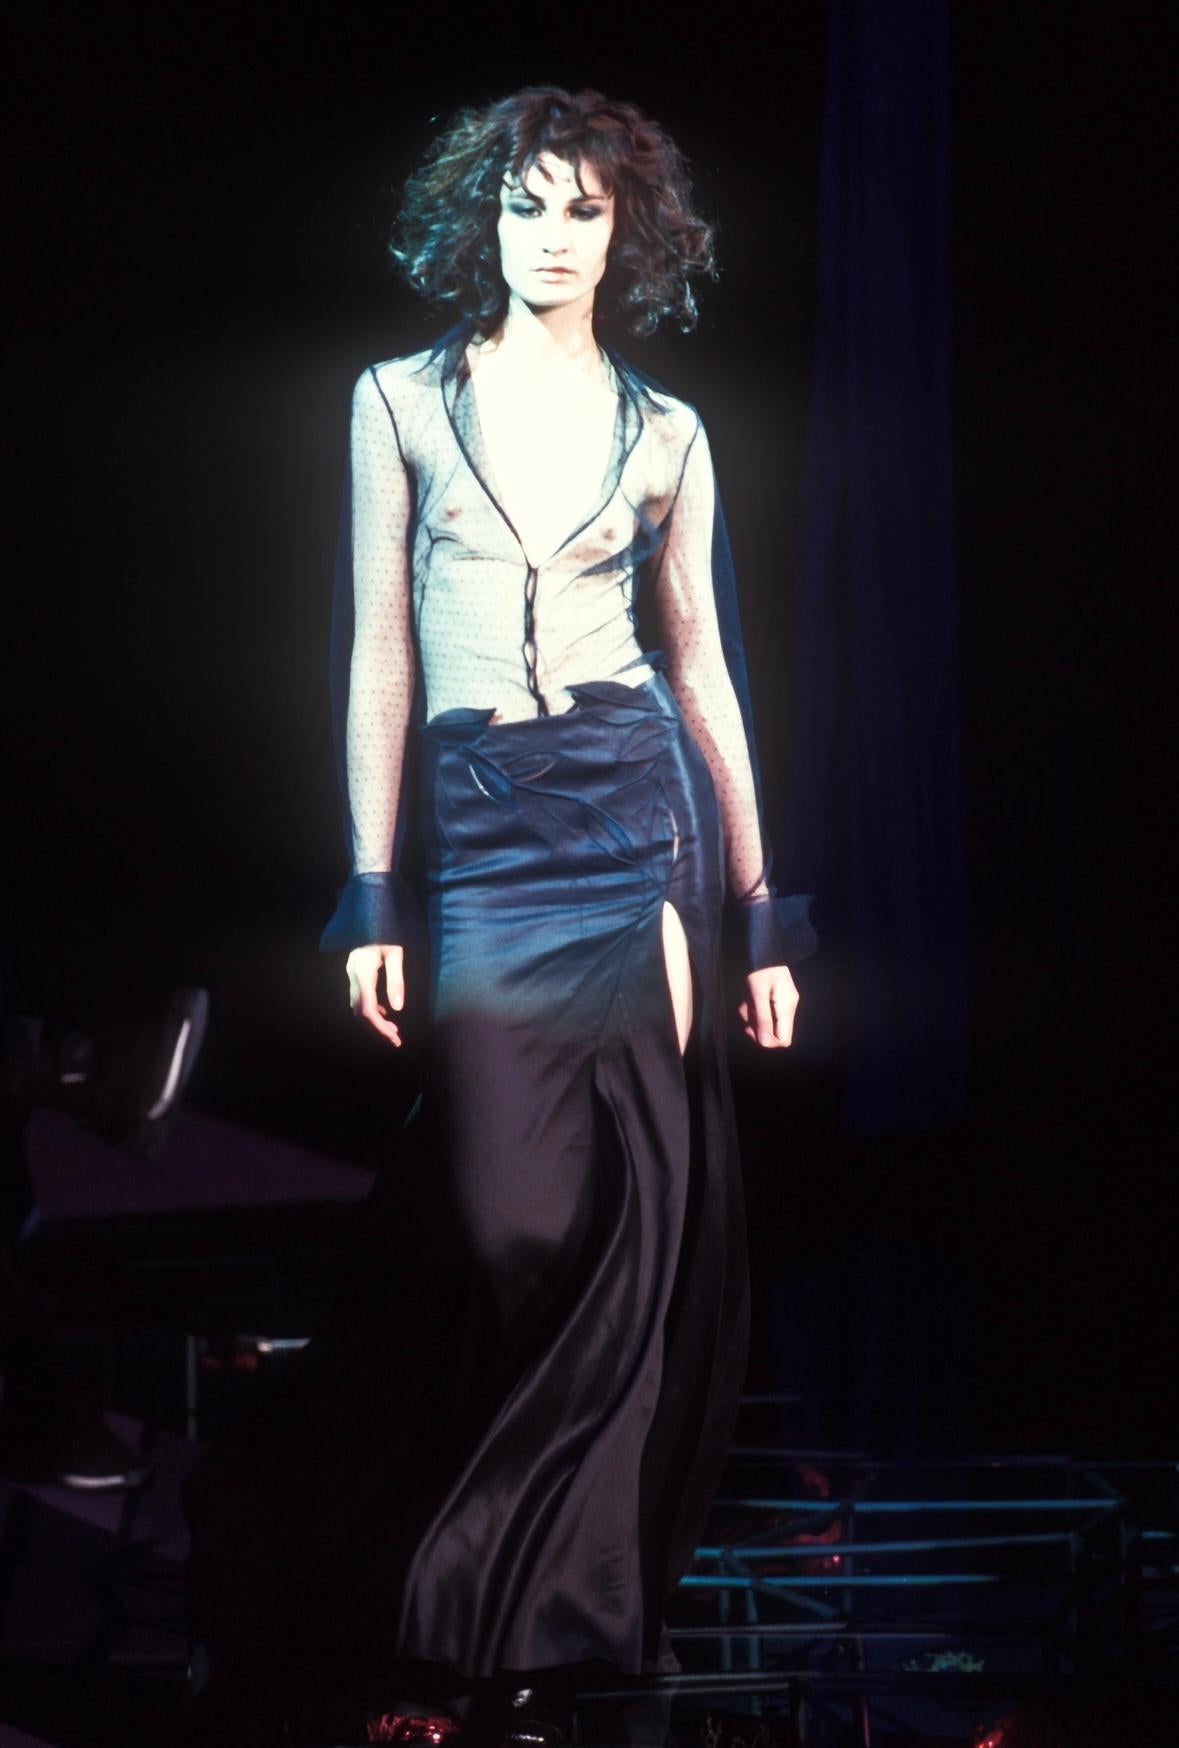 Presenting this incredible black Gianni Versace maxi skirt, designed by Donatella Versace. From the Fall/Winter 1999 collection, this skirt debuted on the season's runway on Erin O'Connor. This dramatic high-slit skirt is adorned with cut-outs and